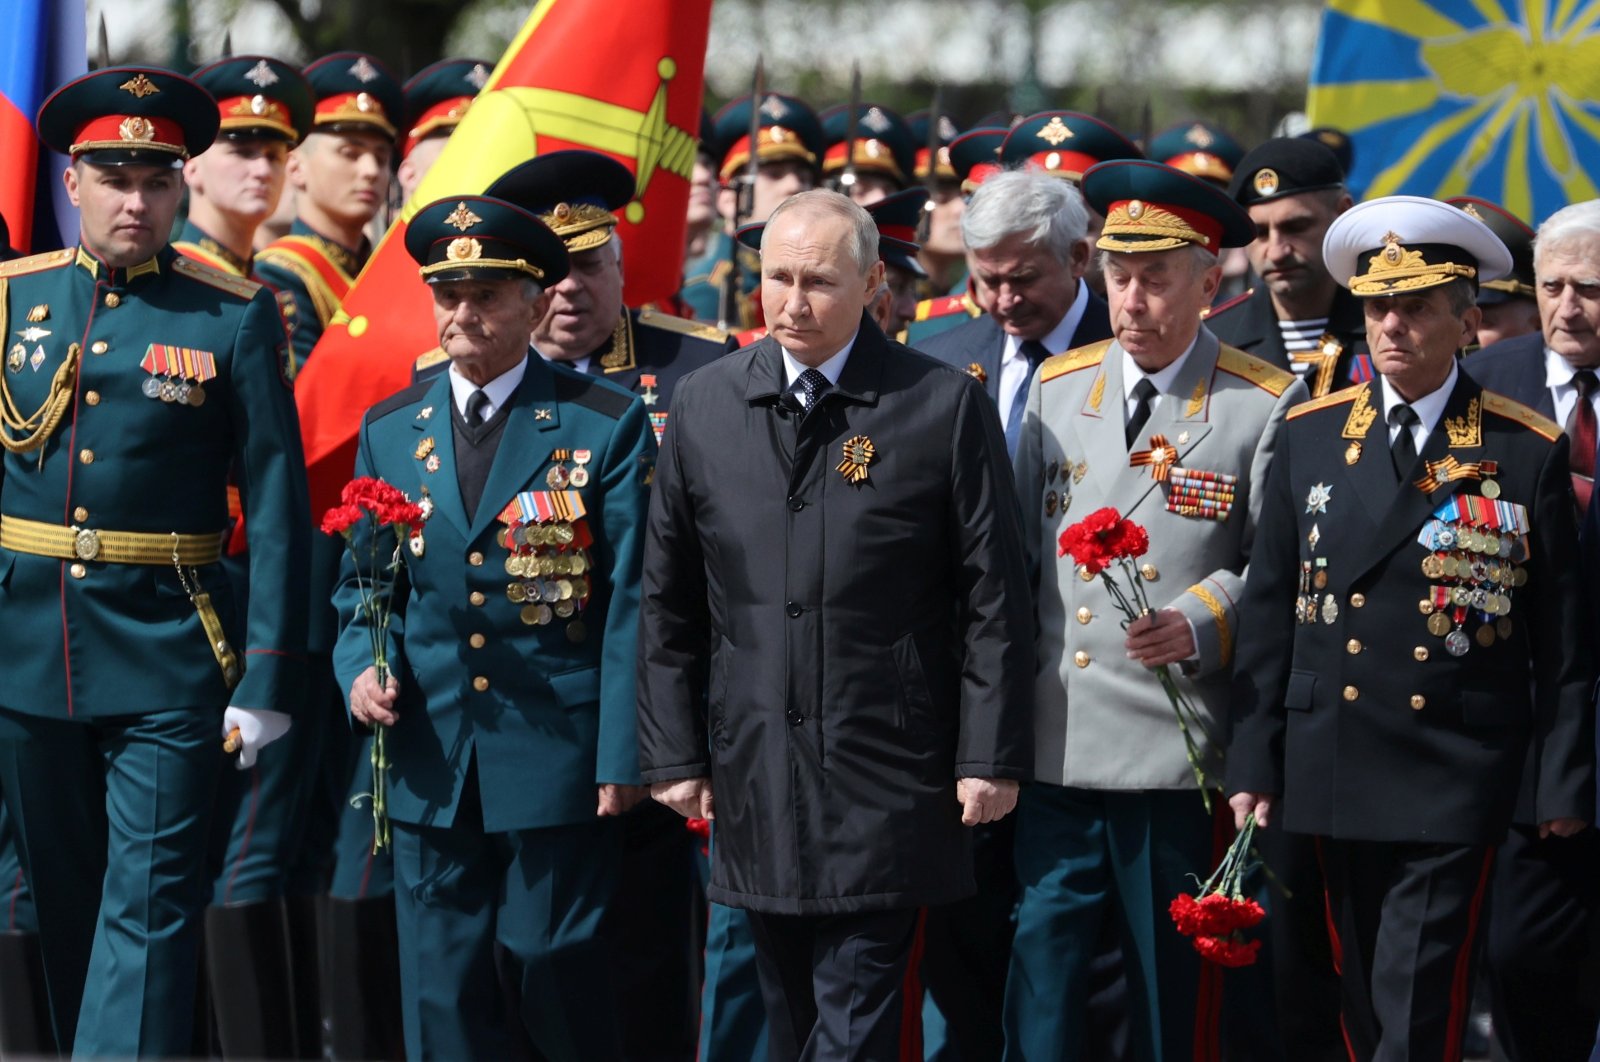 Russian President Vladimir Putin (C) attends a wreath-laying ceremony at the Tomb of the Unknown Soldier after the military parade marking the 77th anniversary of the end of World War II, in Moscow, Russia, Monday, May 9, 2022. (AP Photo)